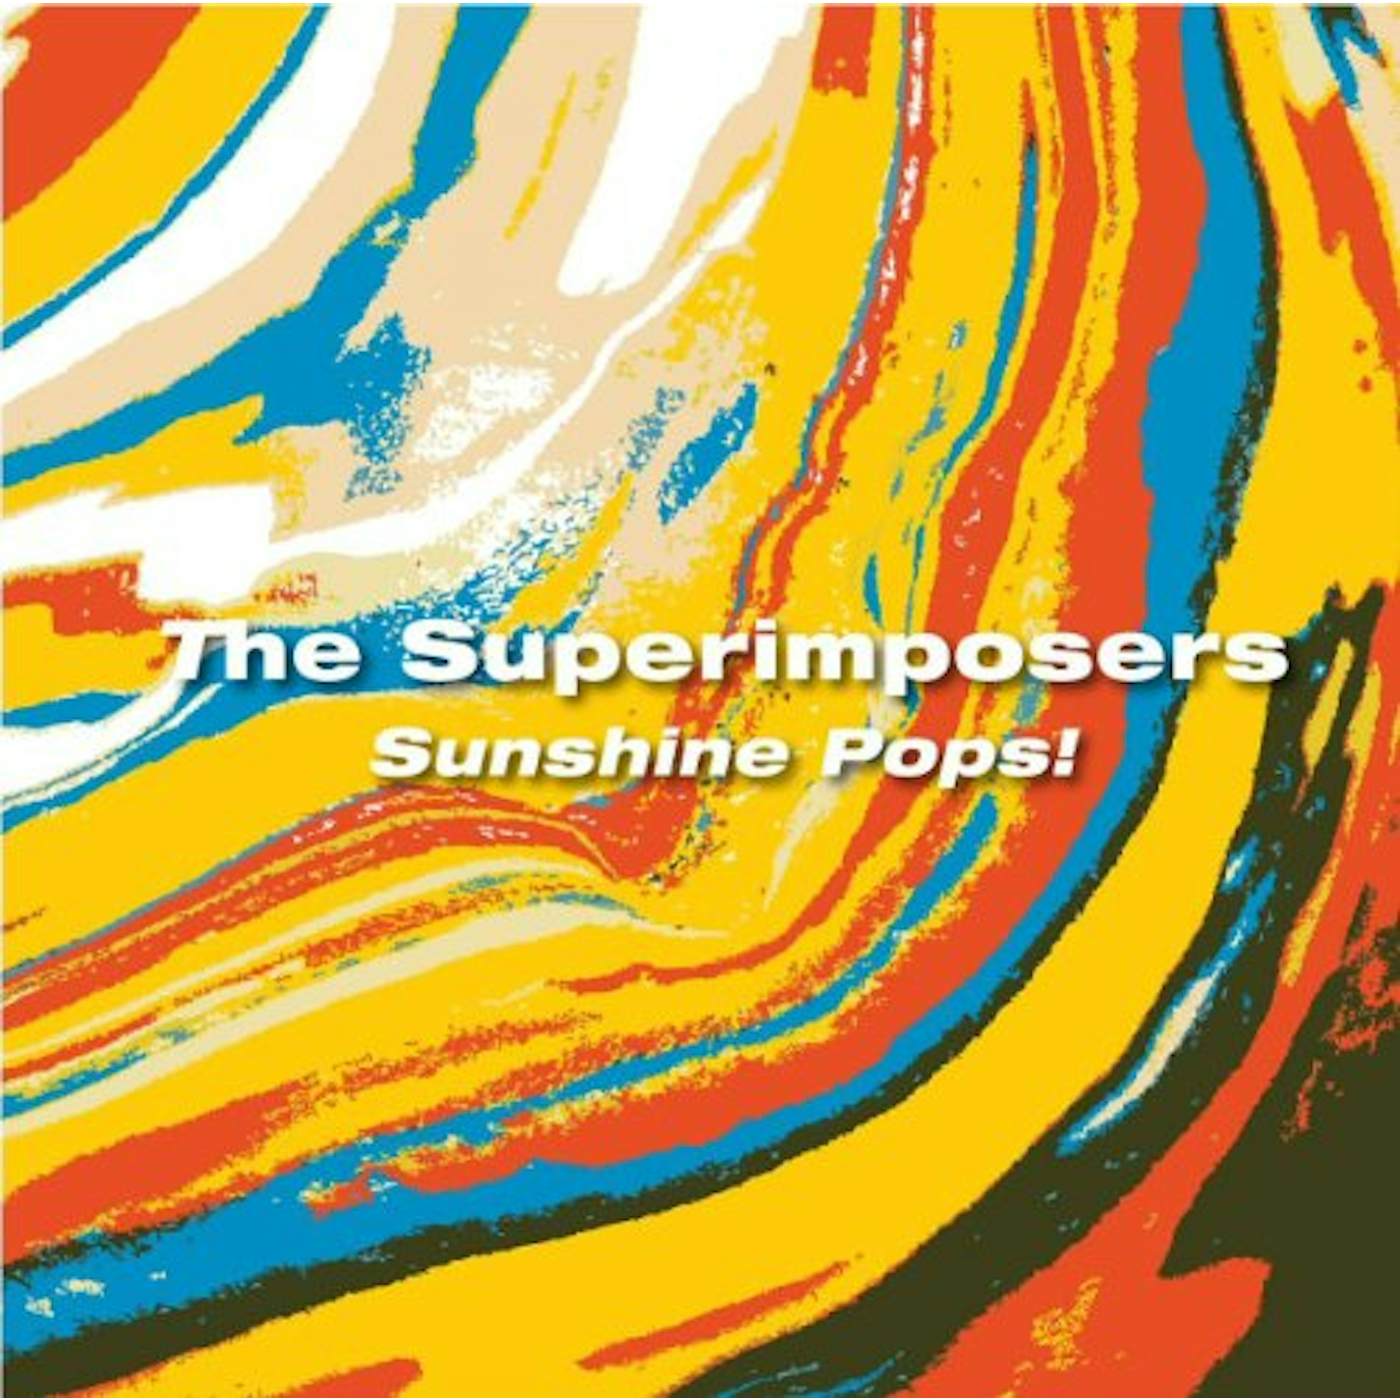 The Superimposers SUNSHINE POPS CD